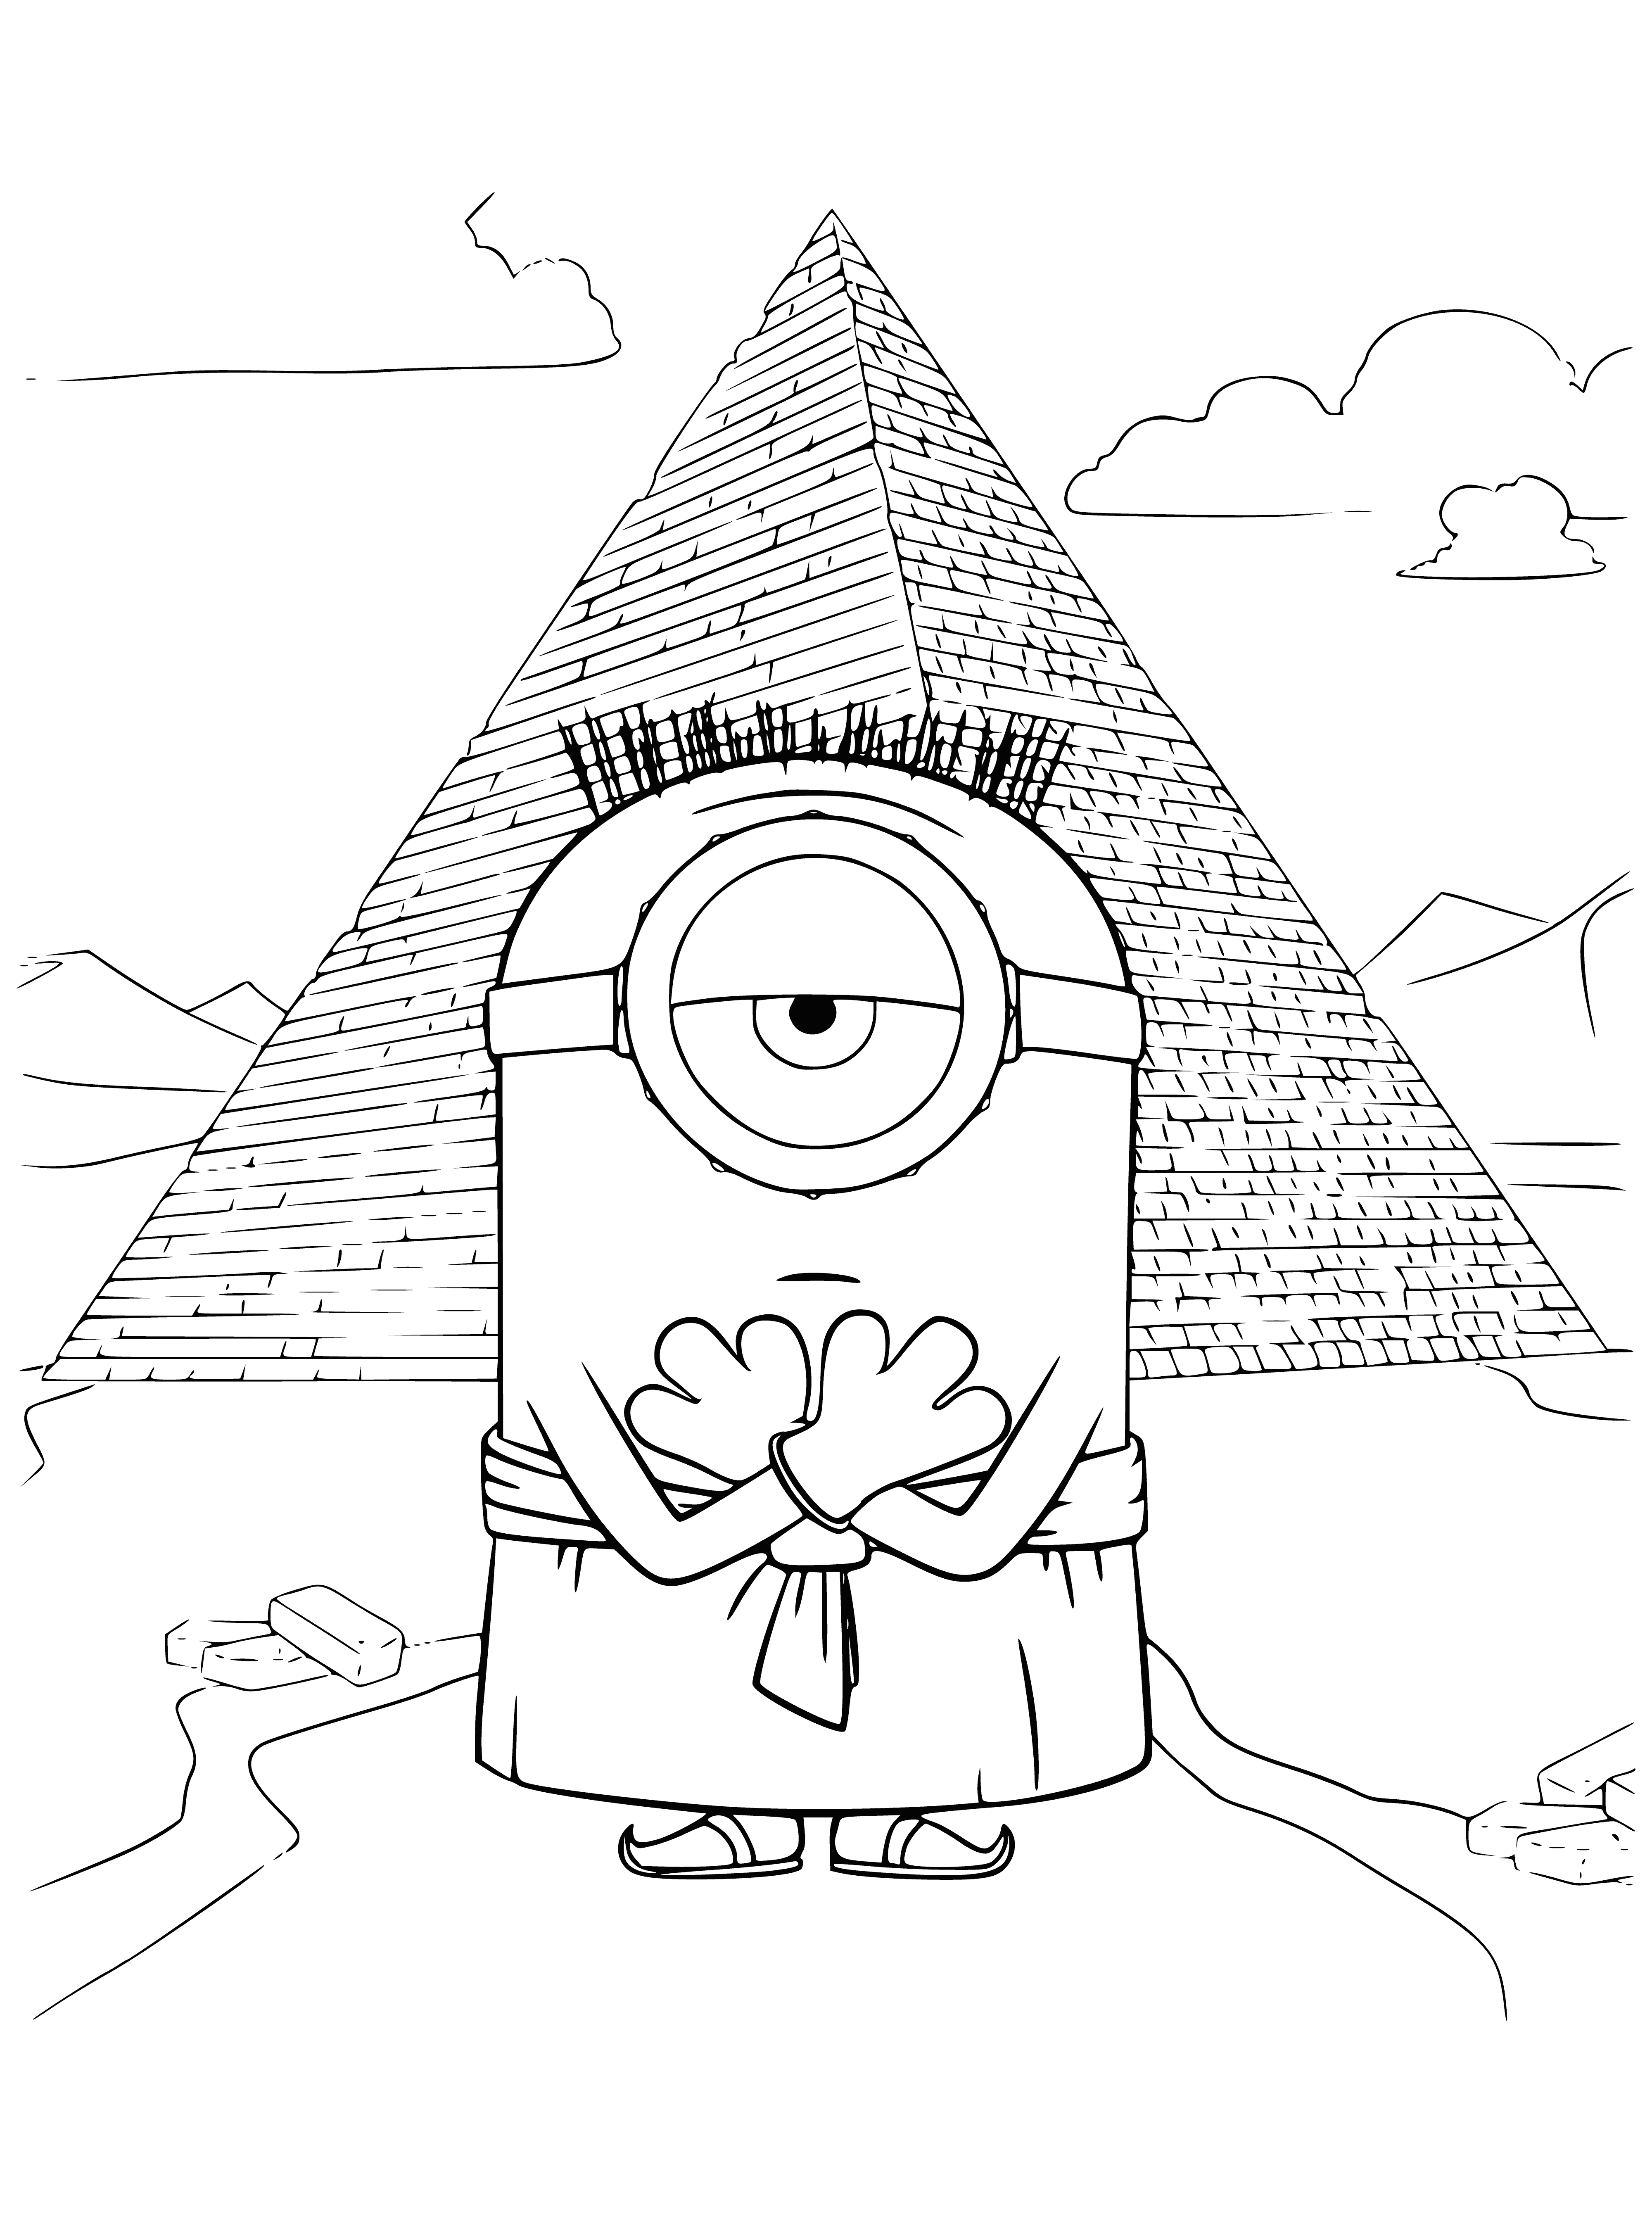 coloring page: The Minions are loyal, yellow cylindrical creatures from the Despicable Me films, always helping Gru!